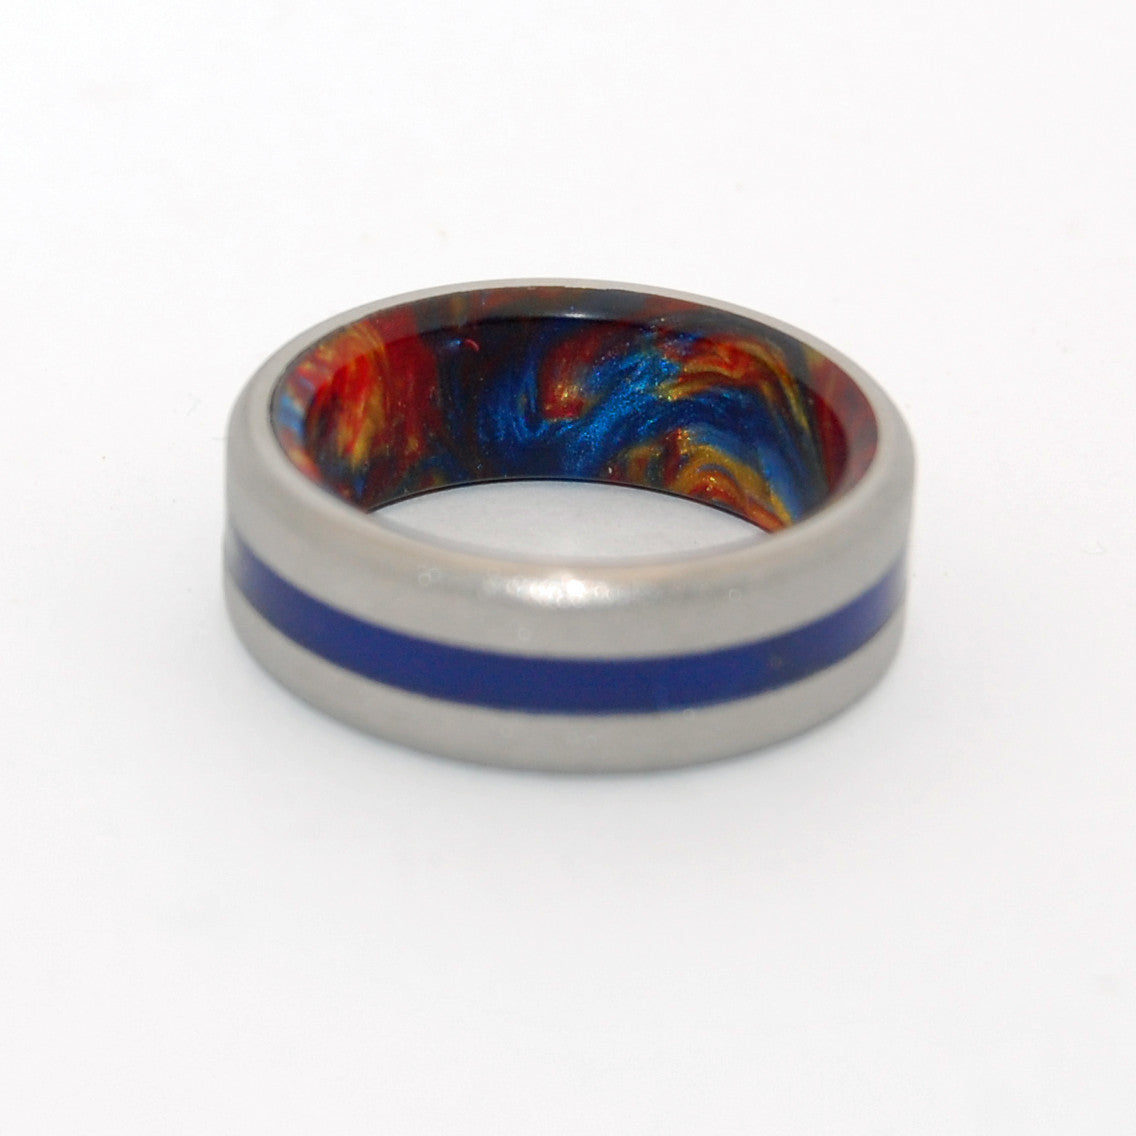 Hot Lava Cool Sea | Handcrafted Titanium Wedding Ring - Minter and Richter Designs